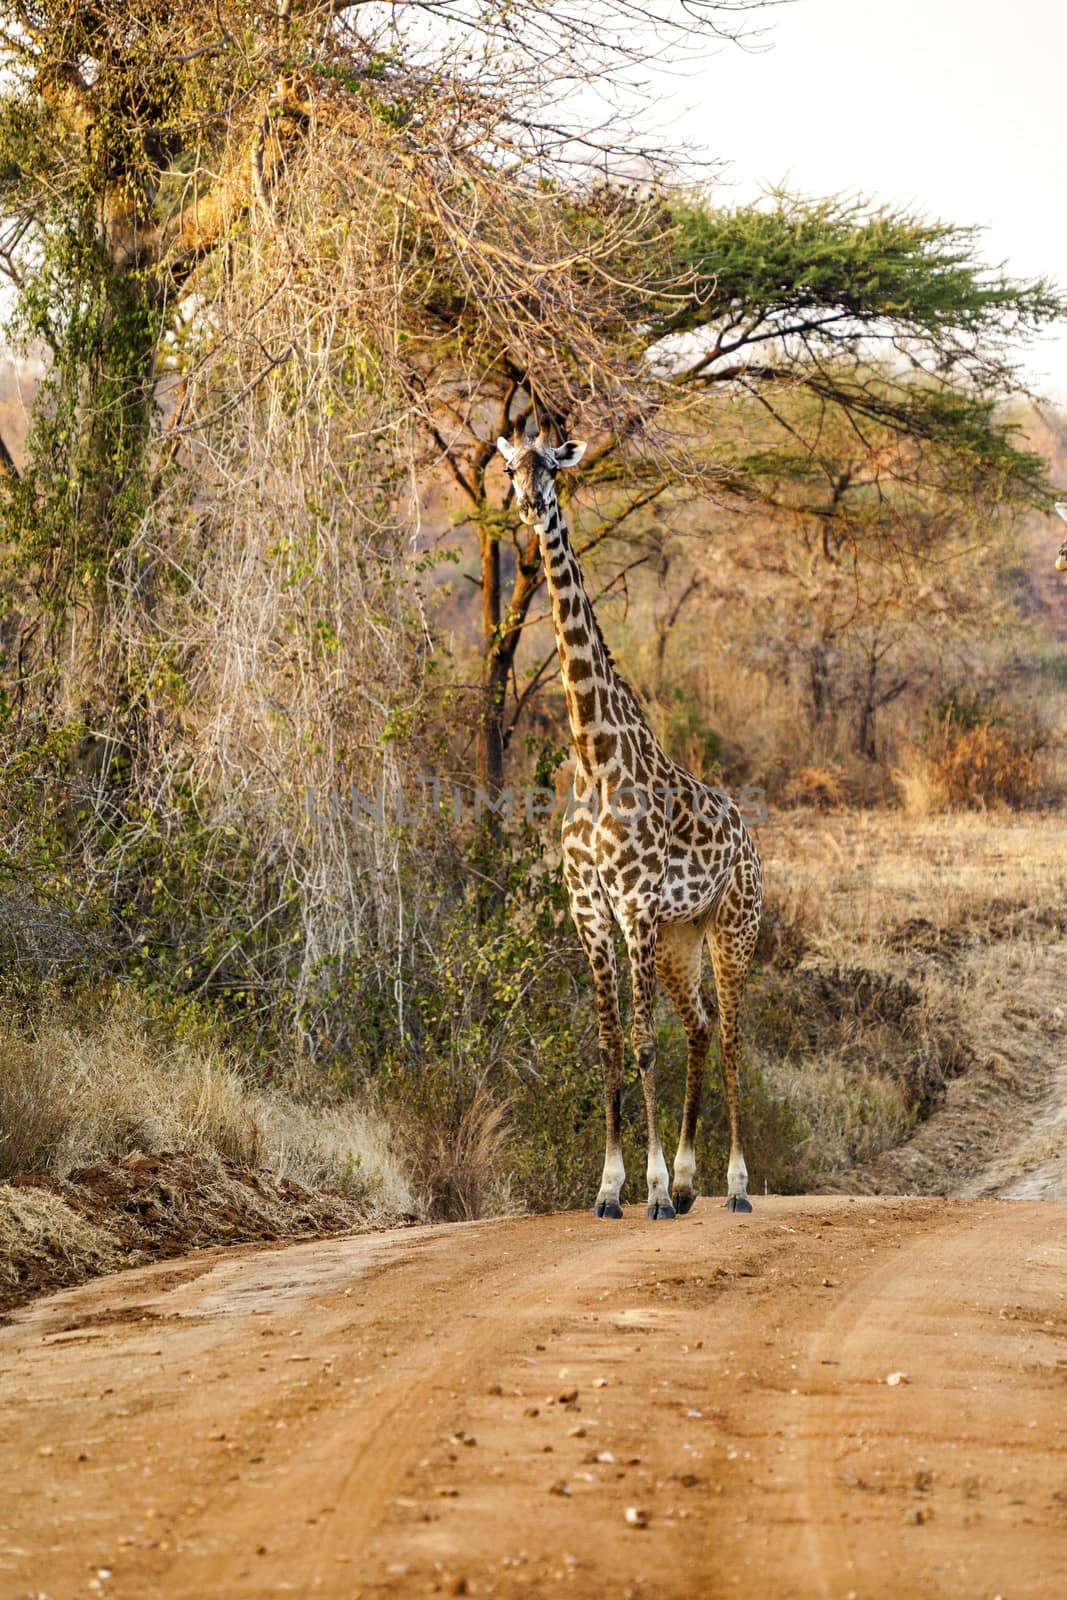 Giraffe standing by the side of the road in Africa